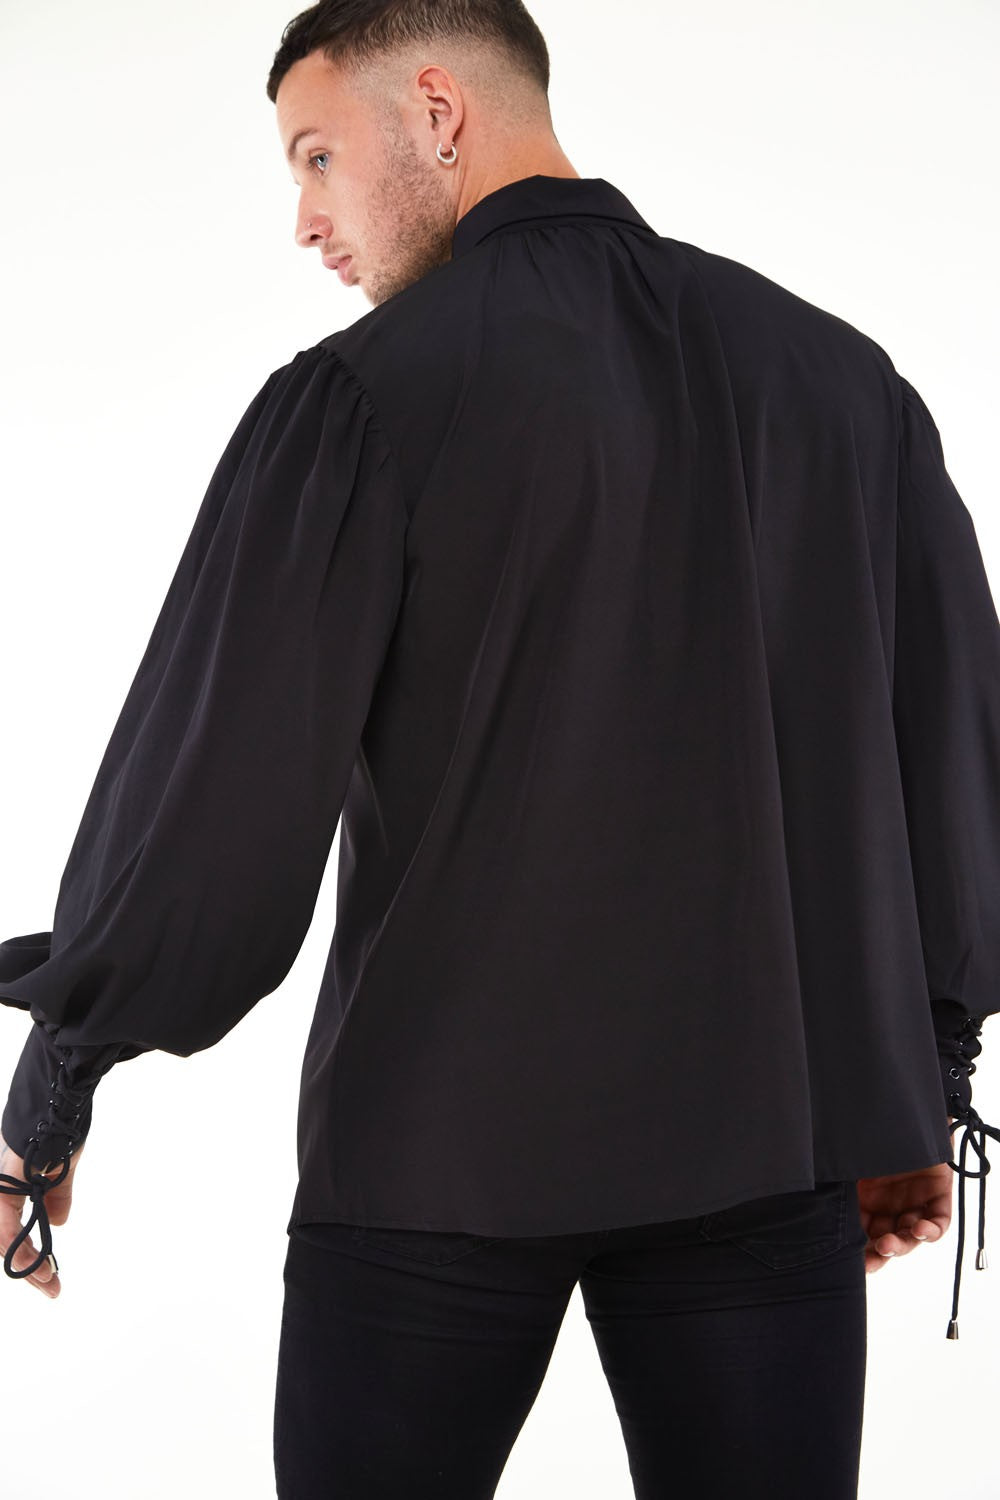 Back view of the Victorian Gothic Shirt.